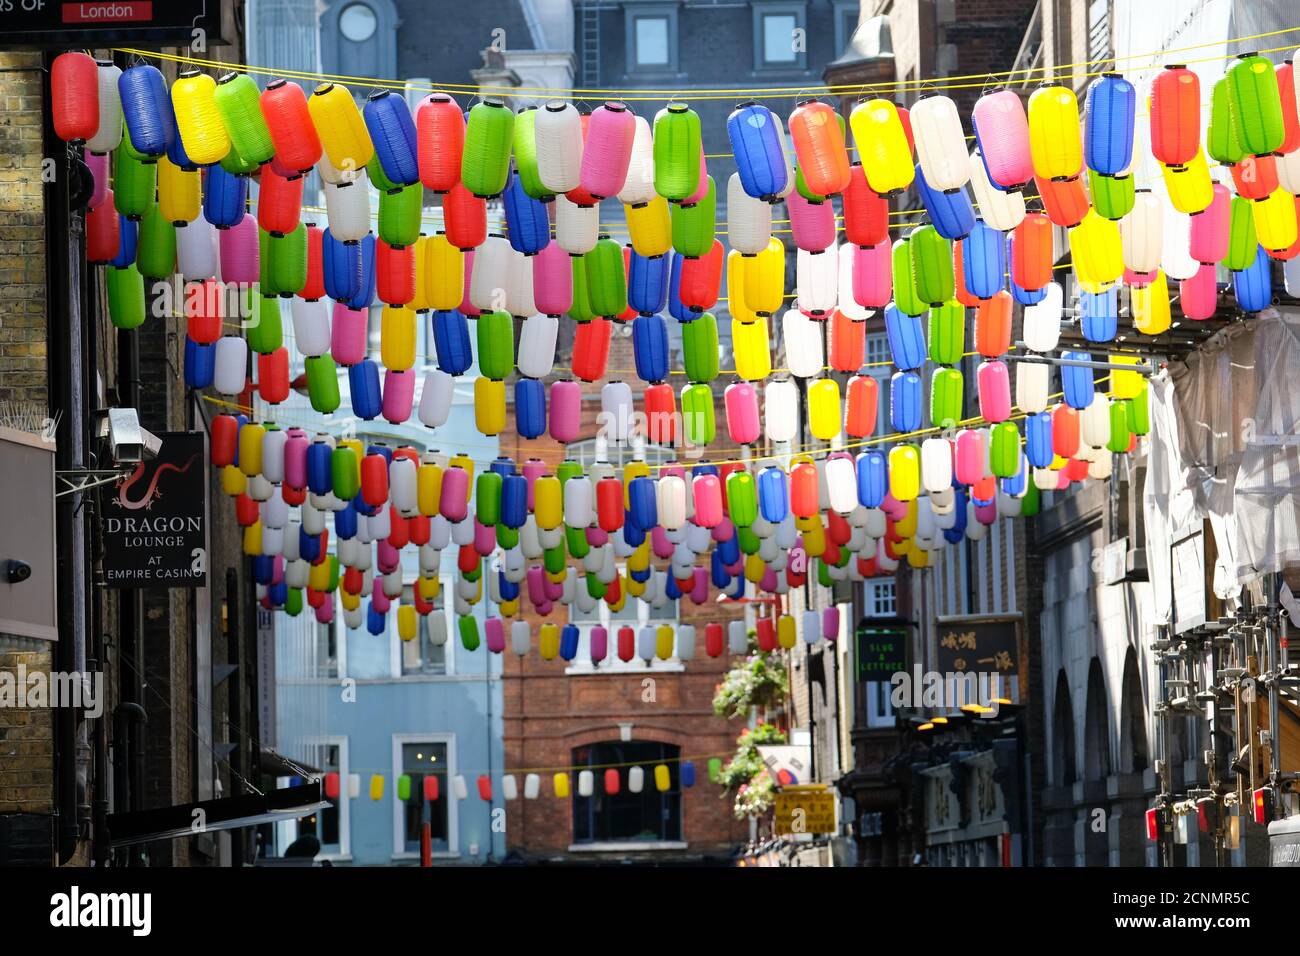 Chinatown, London, UK. 18th September 2020. The Love Chinatown campaign has multi-coloured lanterns replacing the traditional red lanterns as part of the campaign to revitalise the area. Credit: Matthew Chattle/Alamy Live News Stock Photo